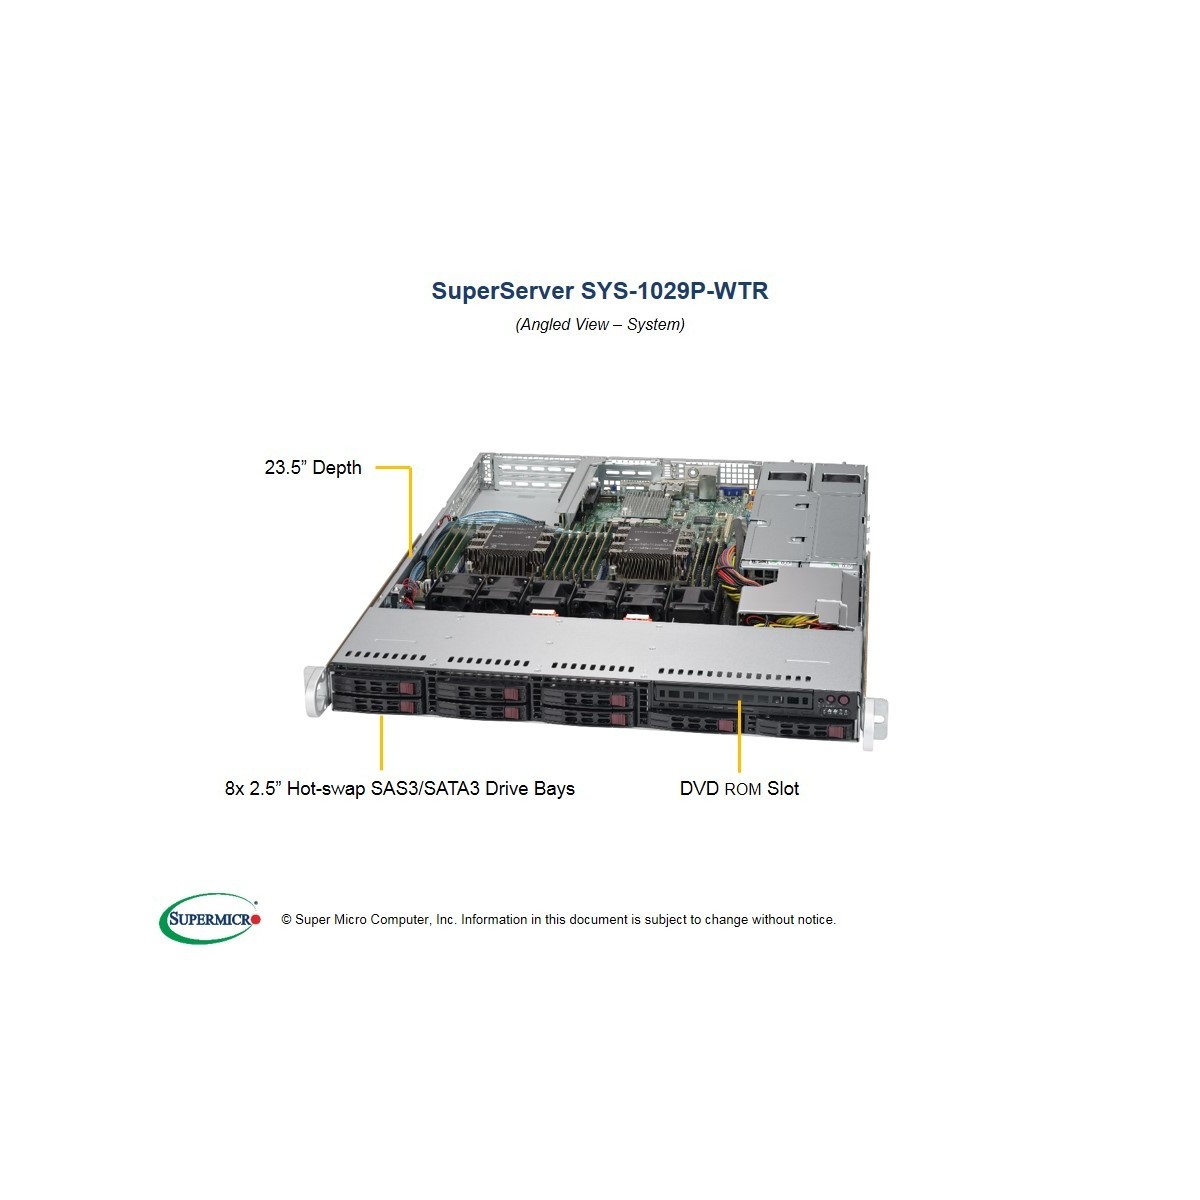 Supermicro SuperServer SYS-1029P-WTR, 1U, 8 Hot-swap 2.5' drive bays w/ 2 Xeon Scalable Processors support, C621 chipset, 750W P